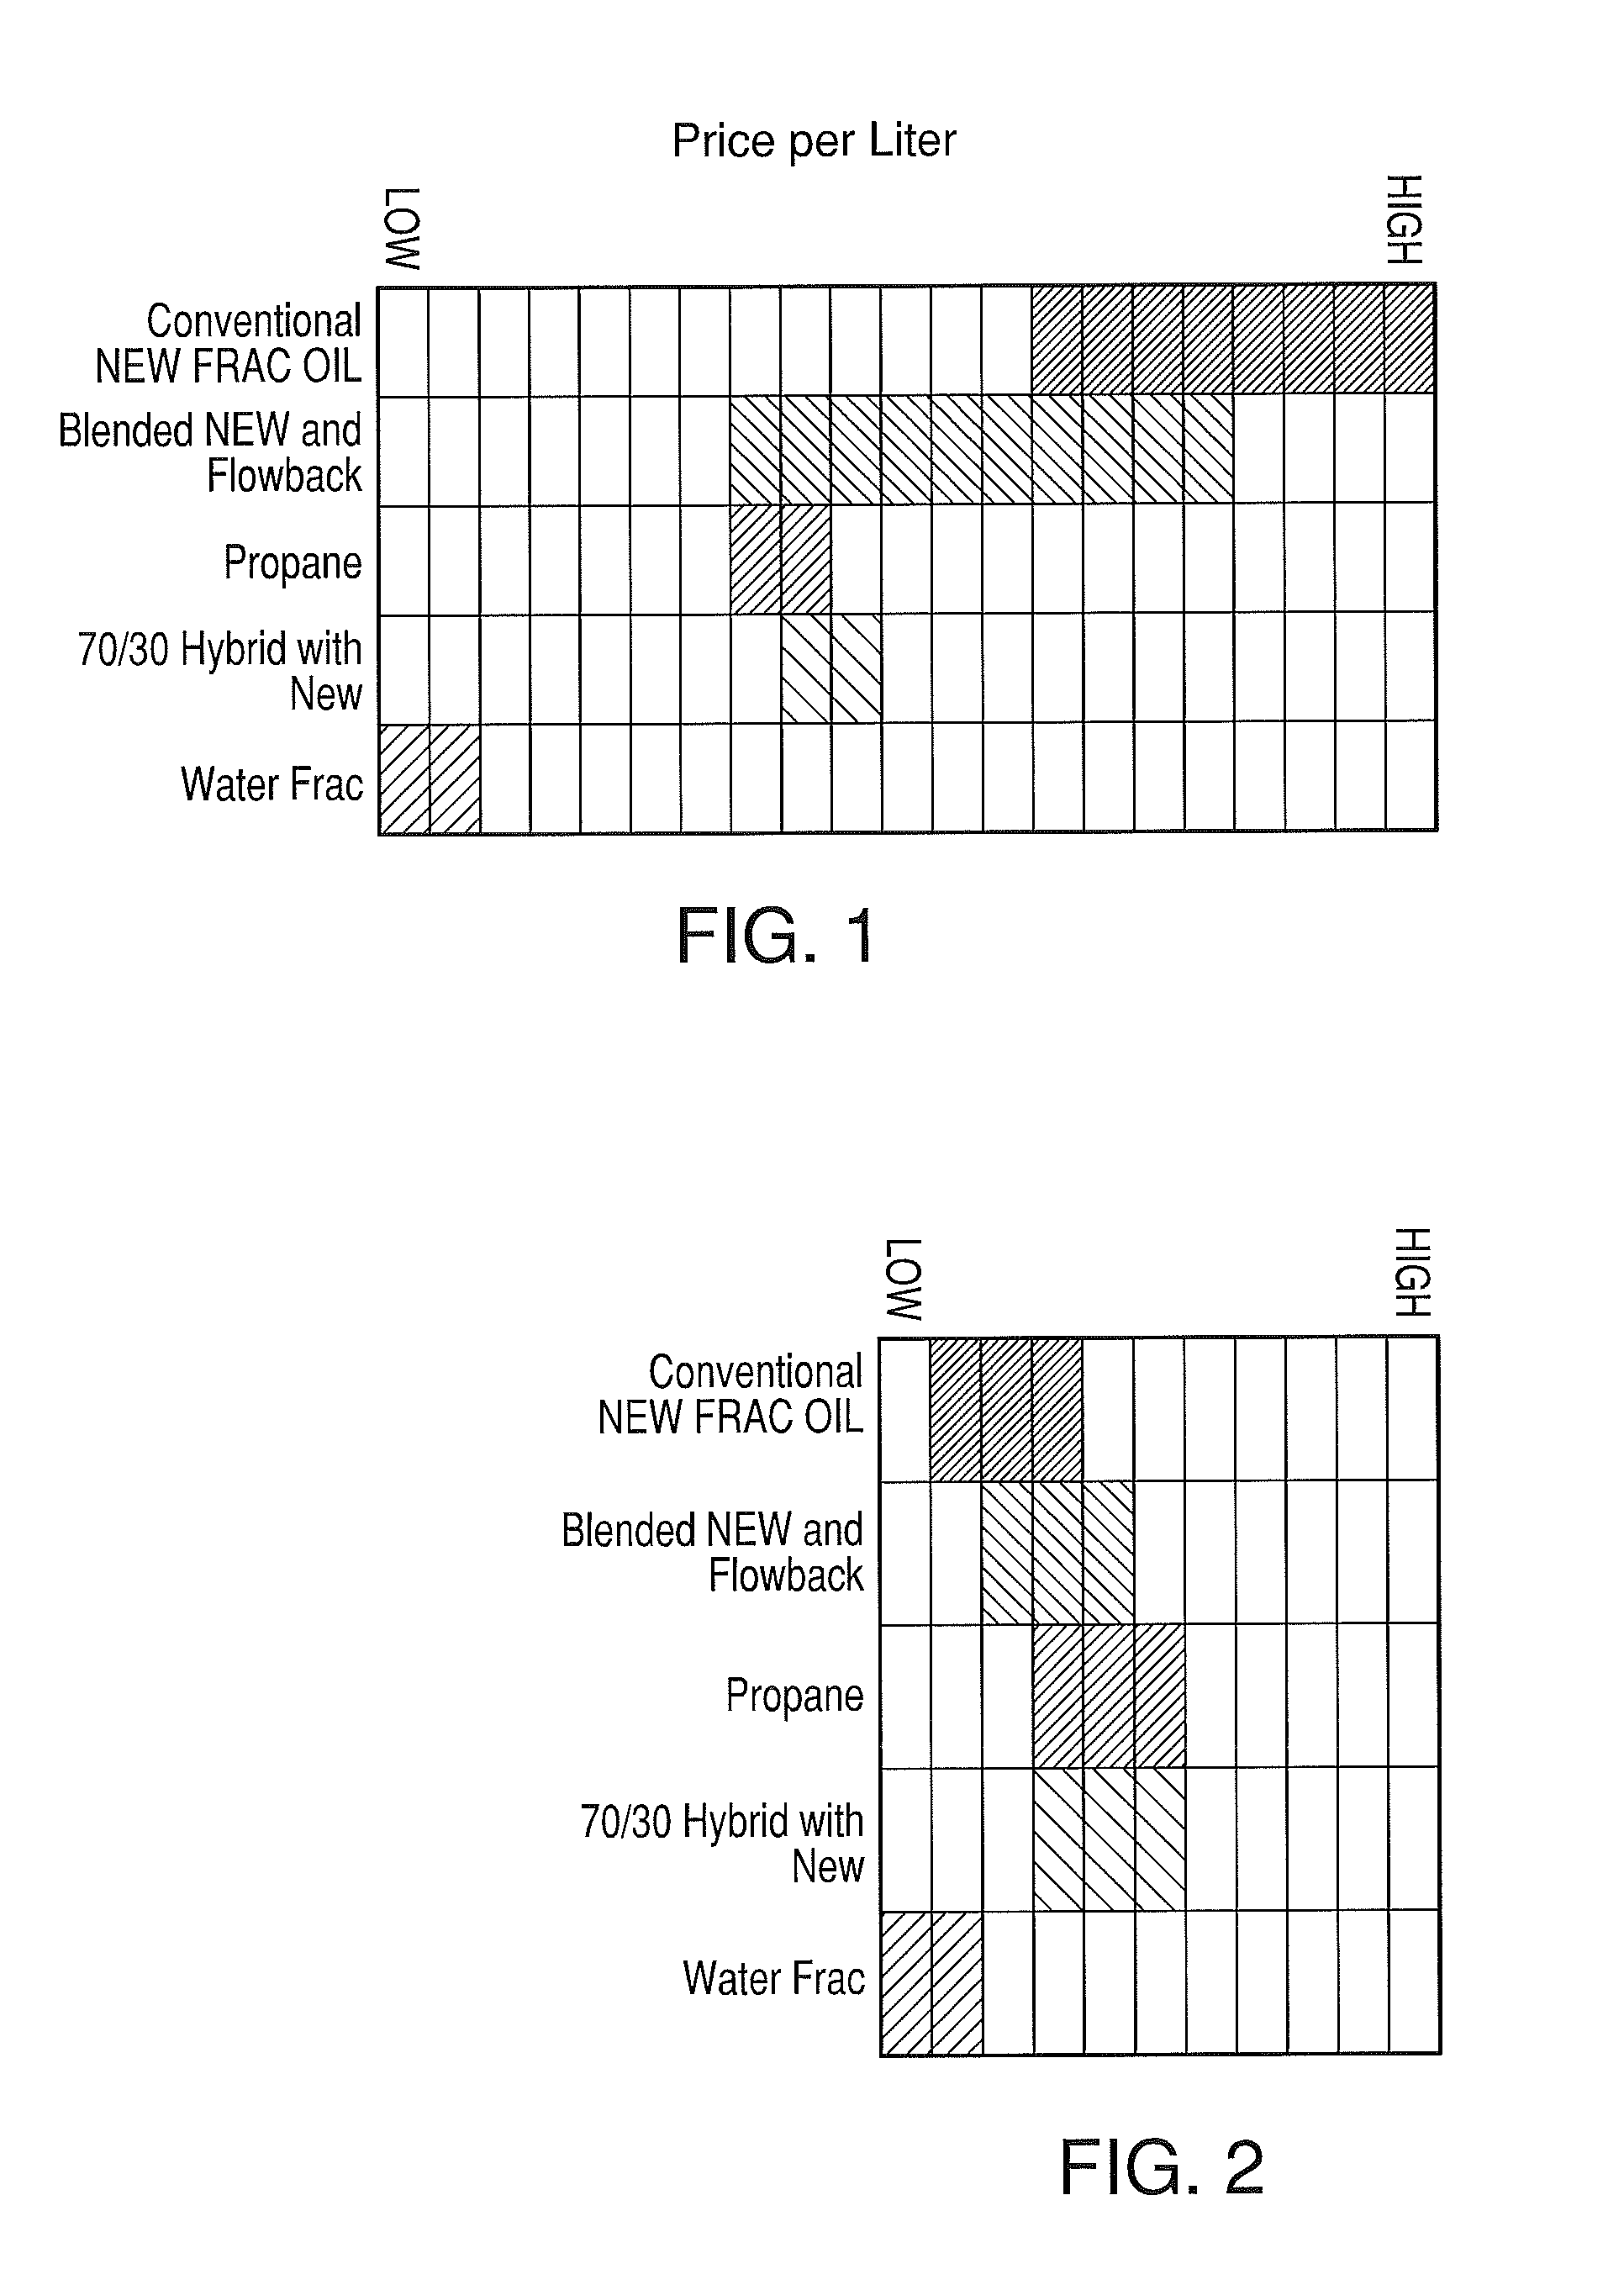 Environmentally sealed system for fracturing subterranean formations